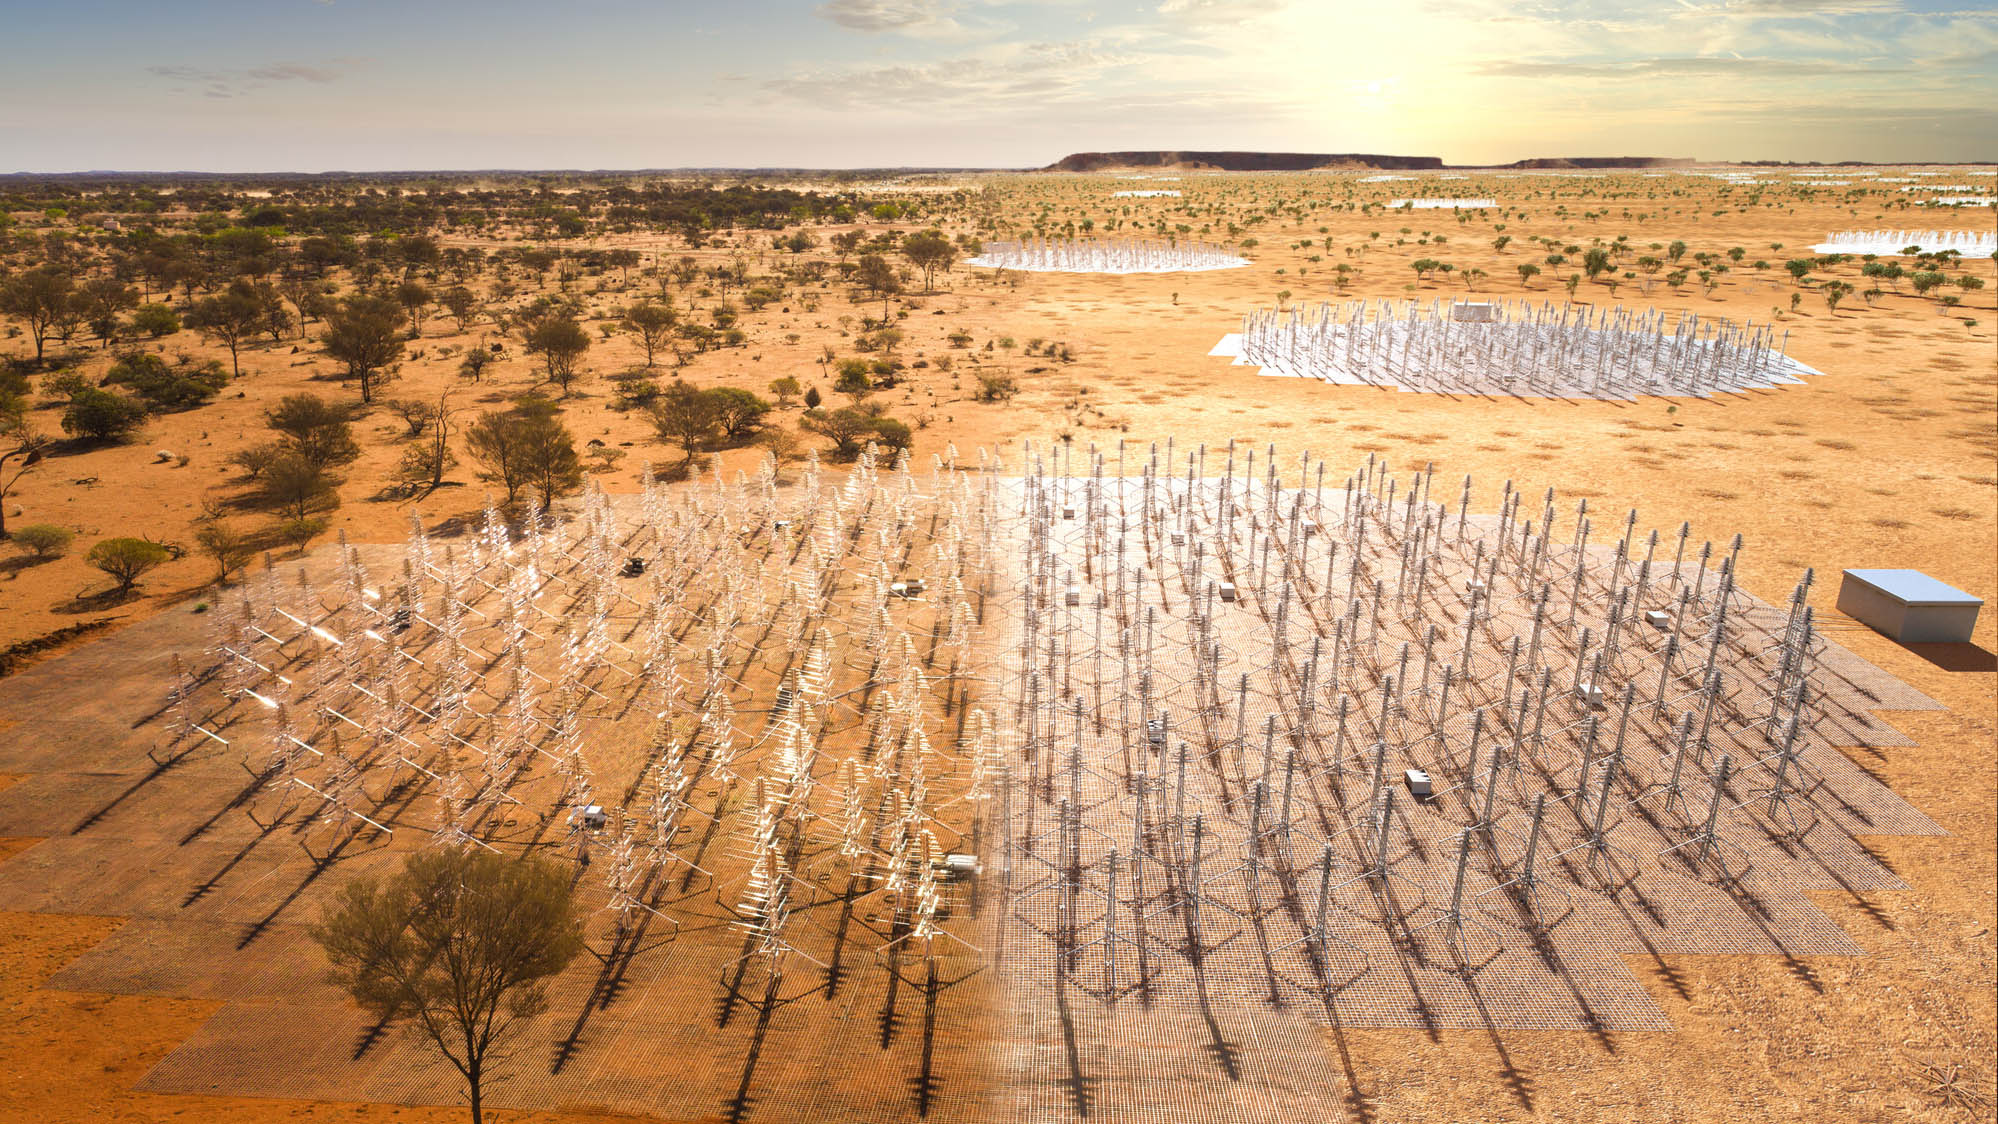 The dipole antennas are arranged in several huge circles in the Australian desert.